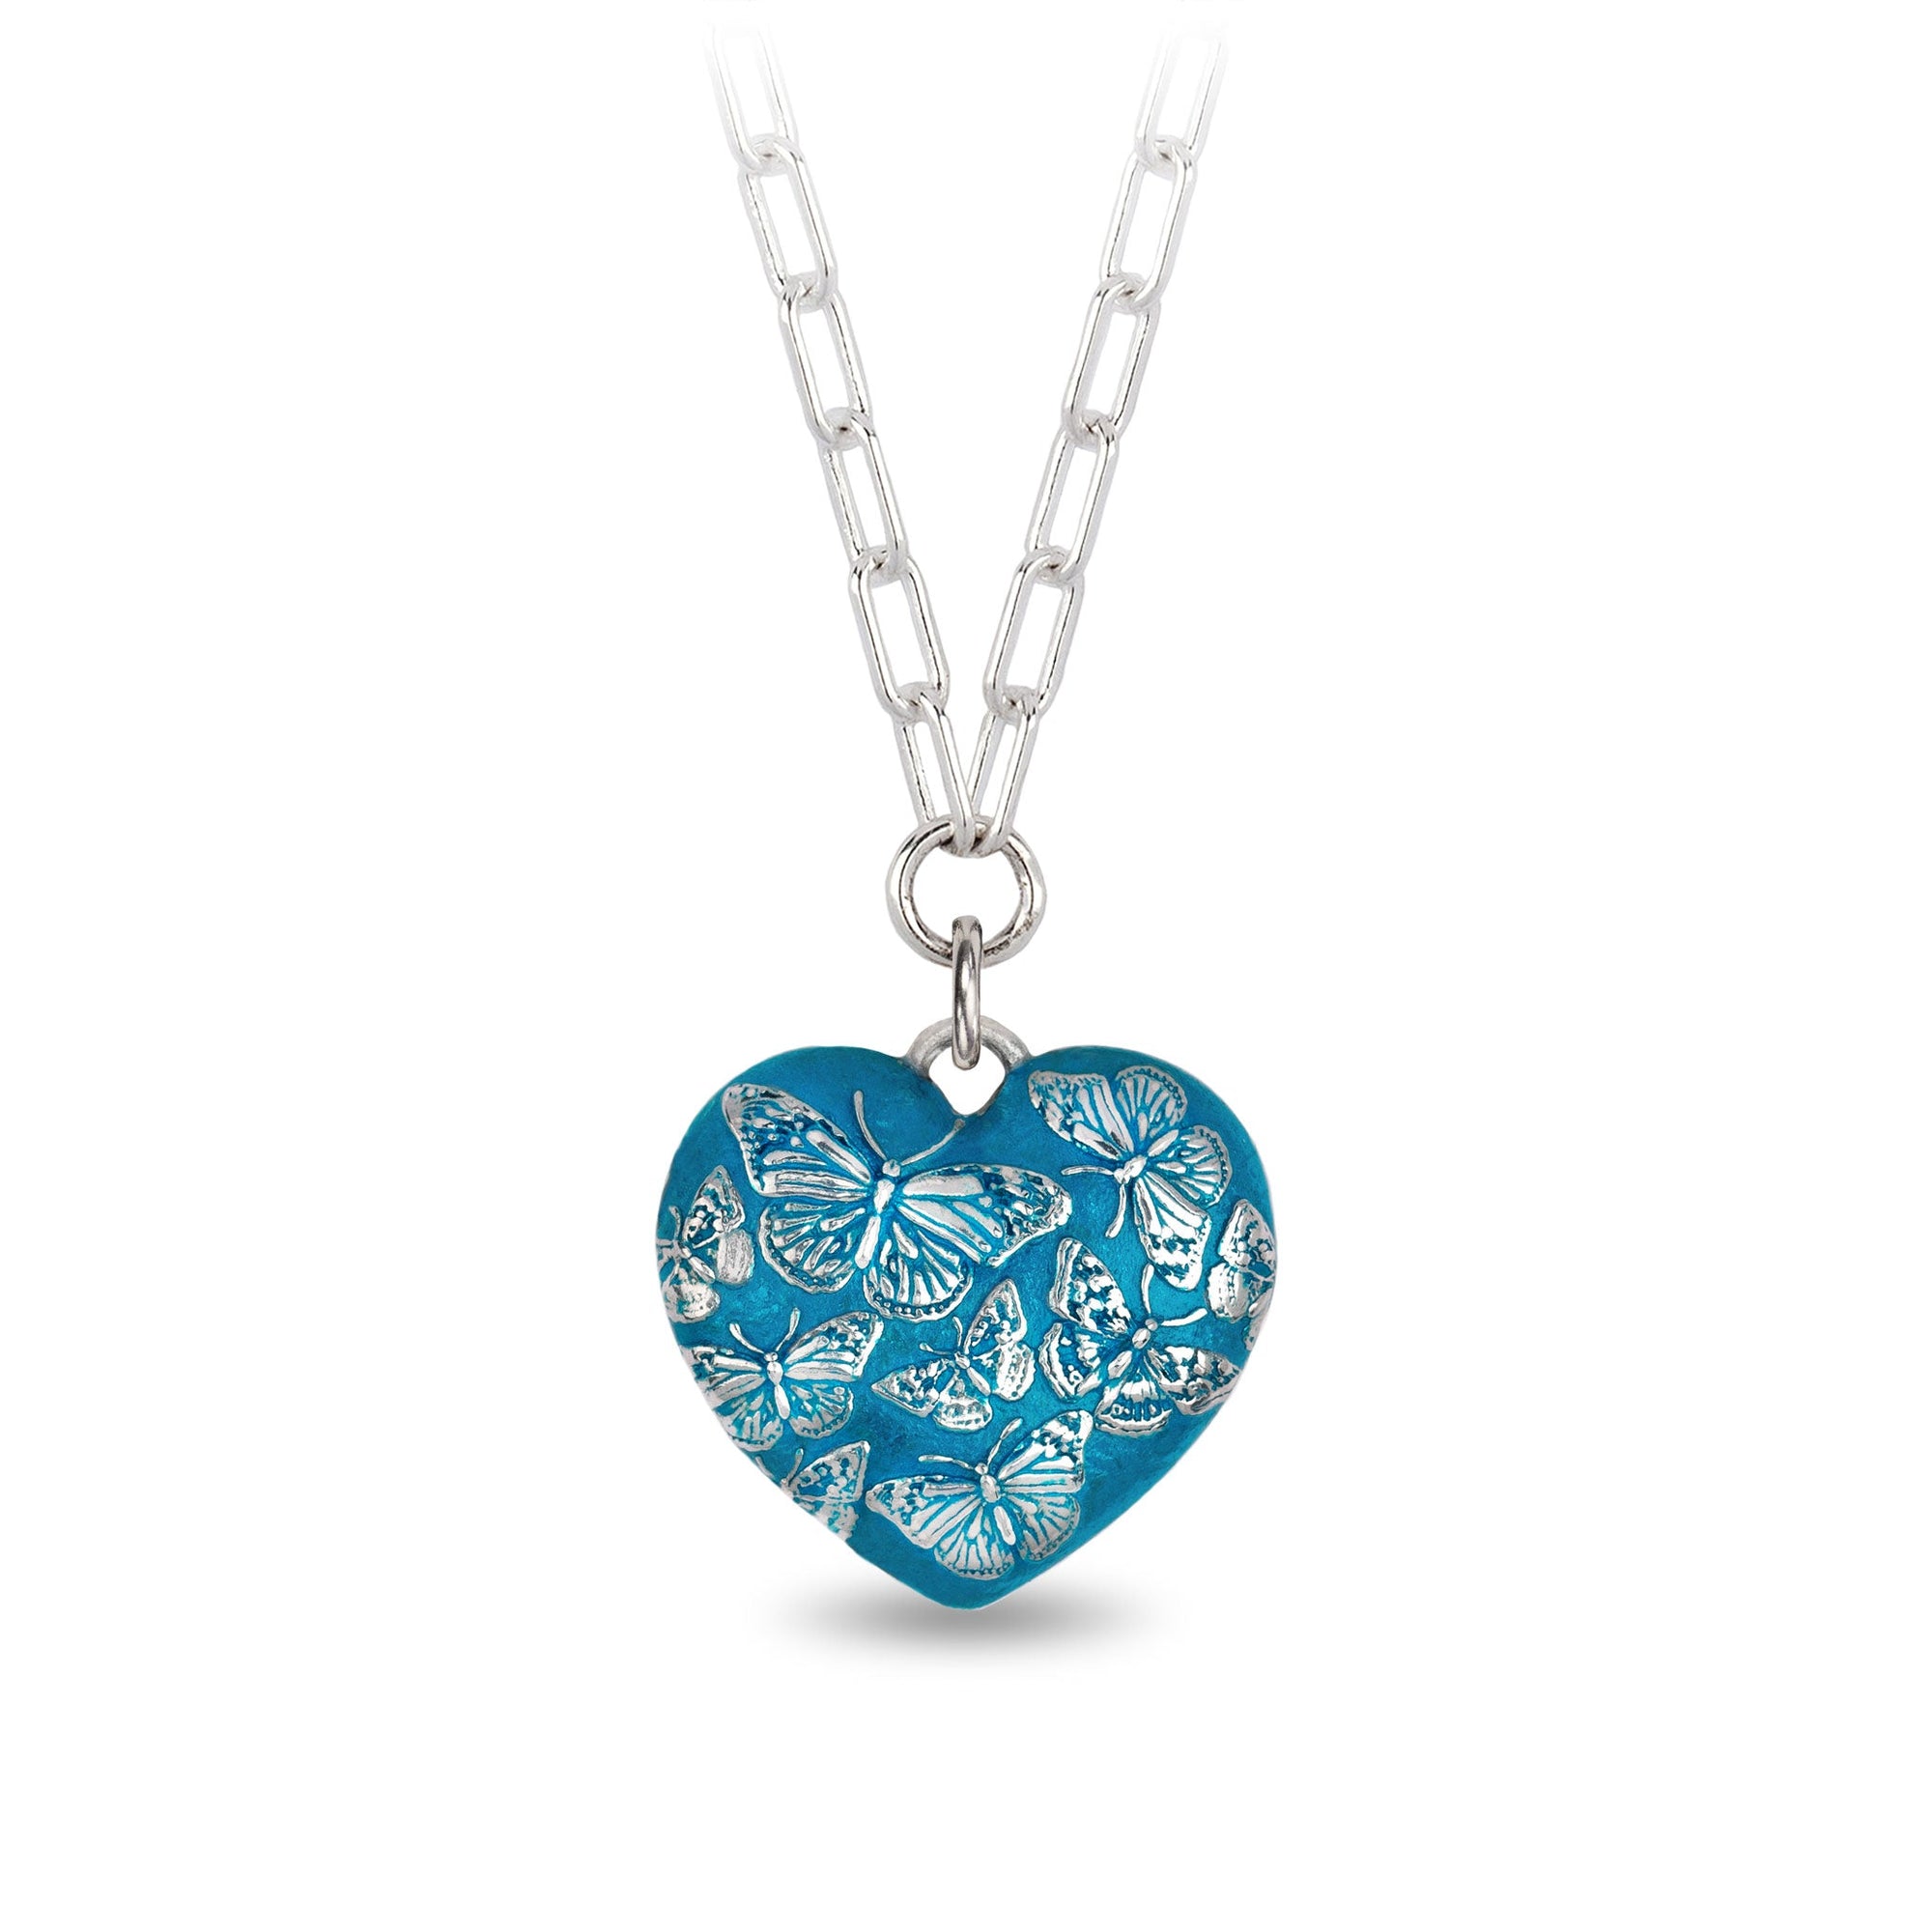 Butterfly Large Puffed Heart Small Paperclip Chain Necklace - Capri Blue